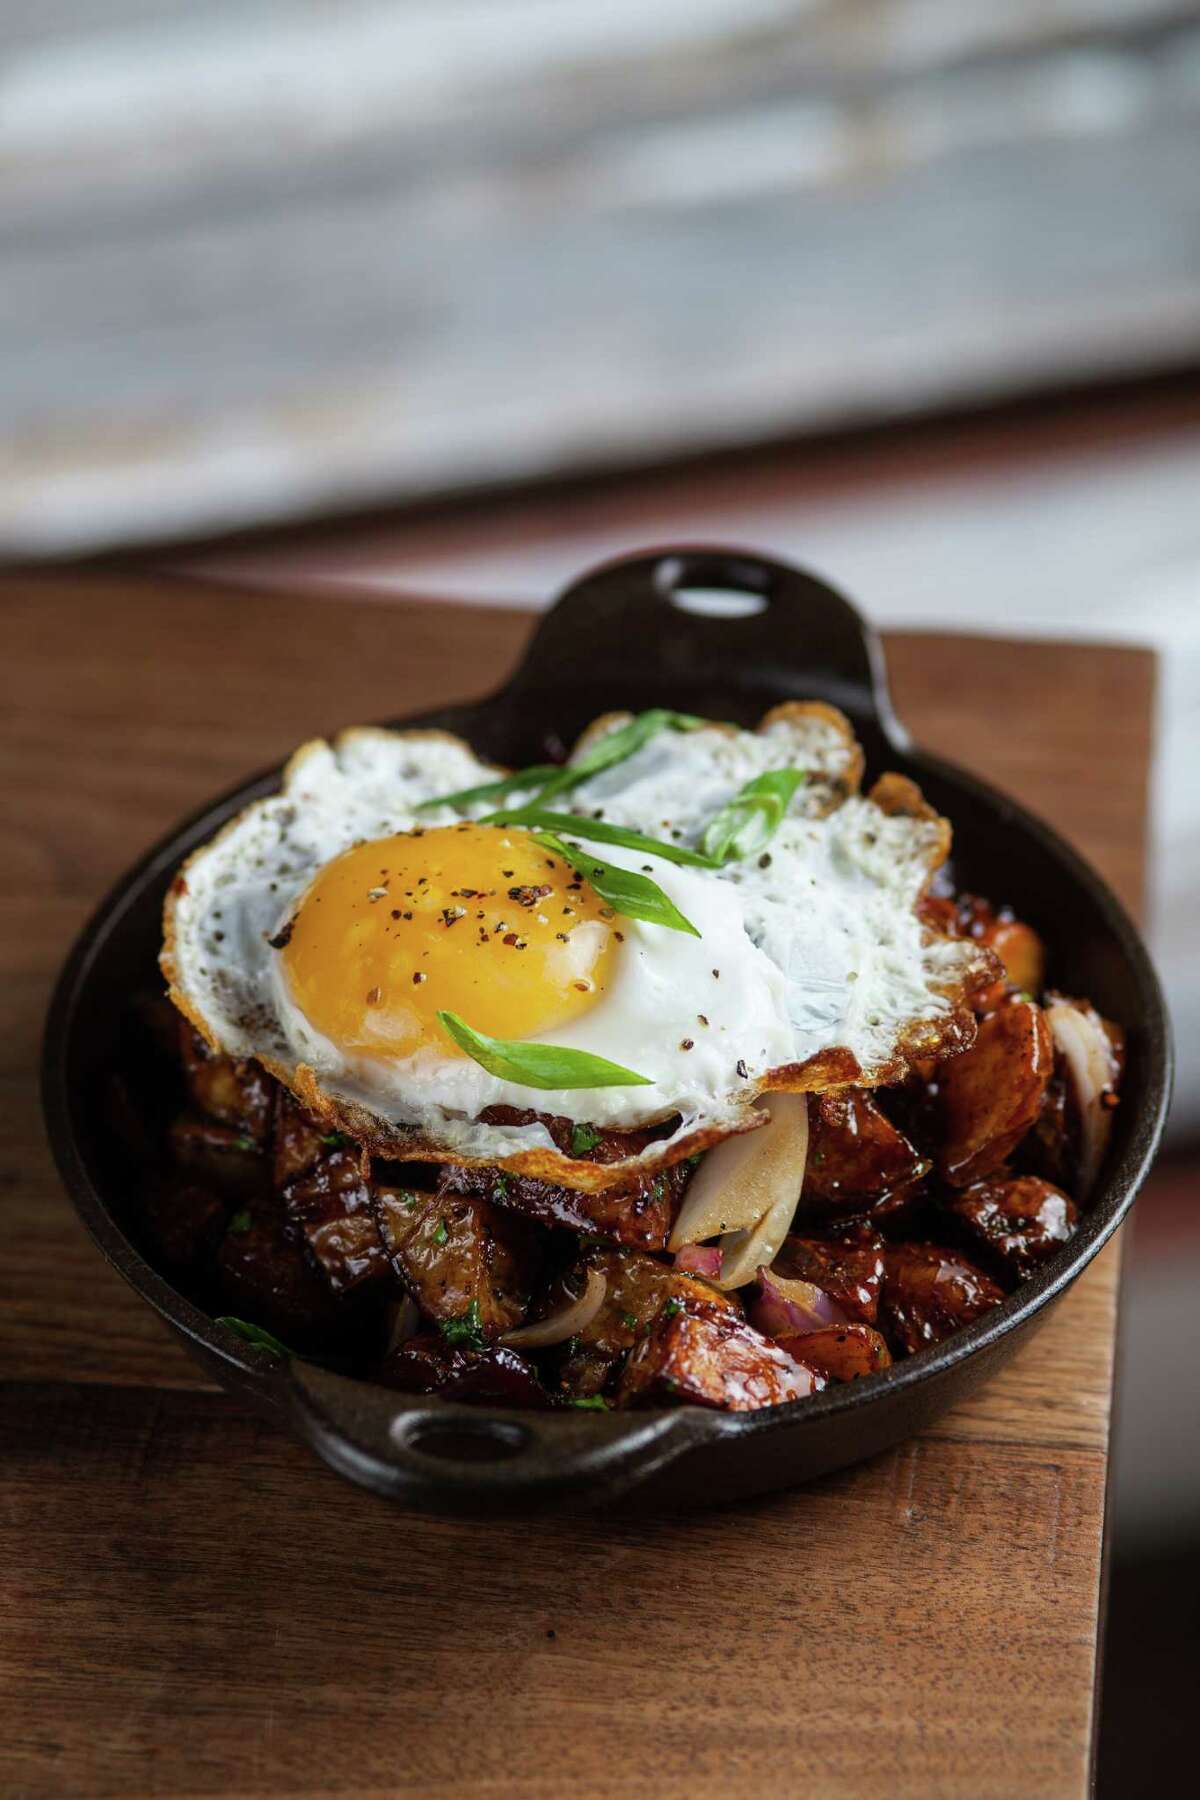 Underbelly: Potatoes with bacon jam, and a duck egg.